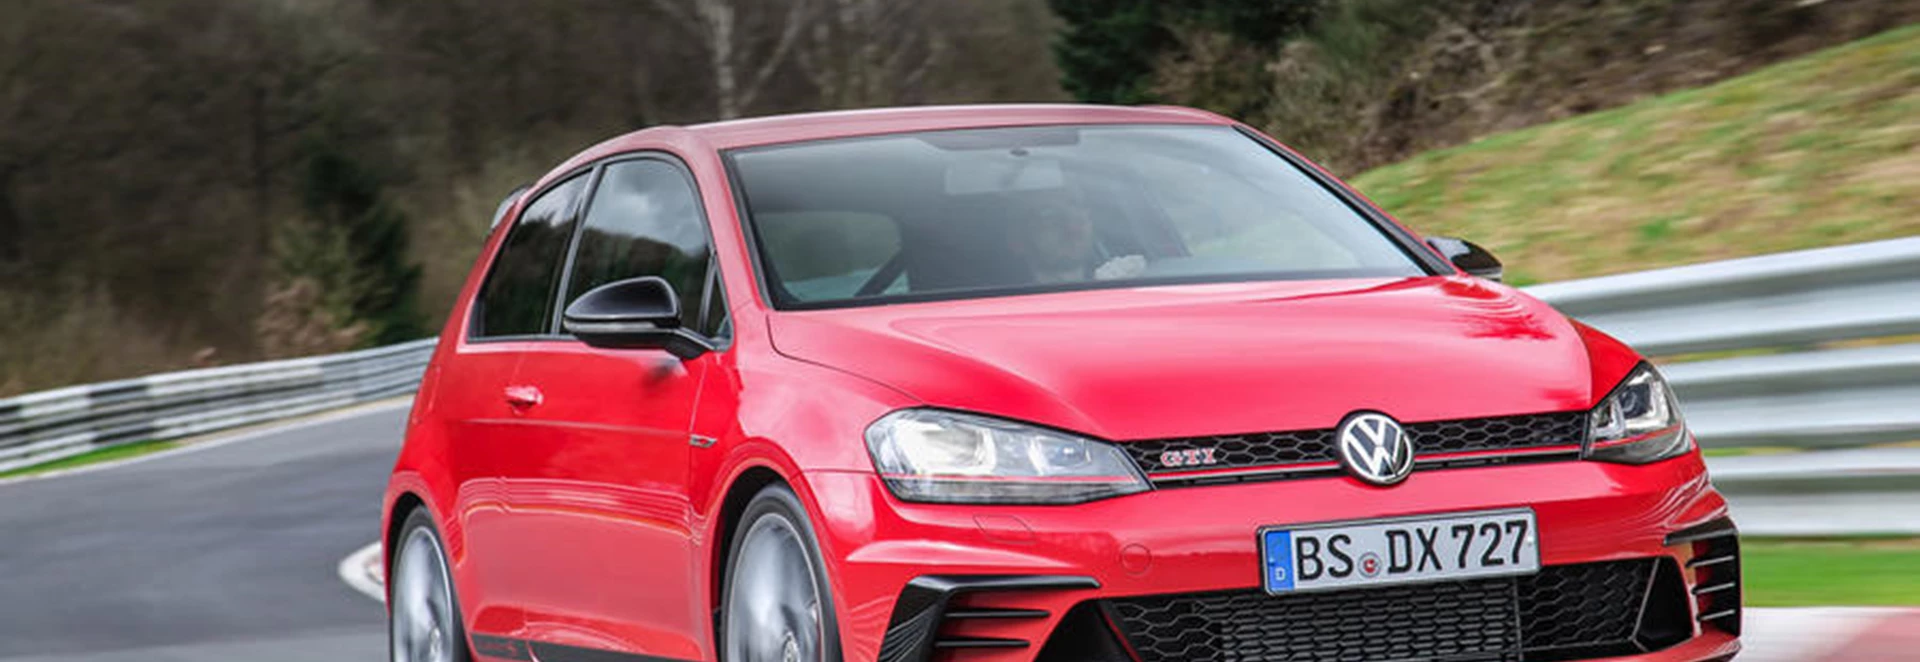 Volkswagen Golf GTI Clubsport S hot hatch sold out in UK